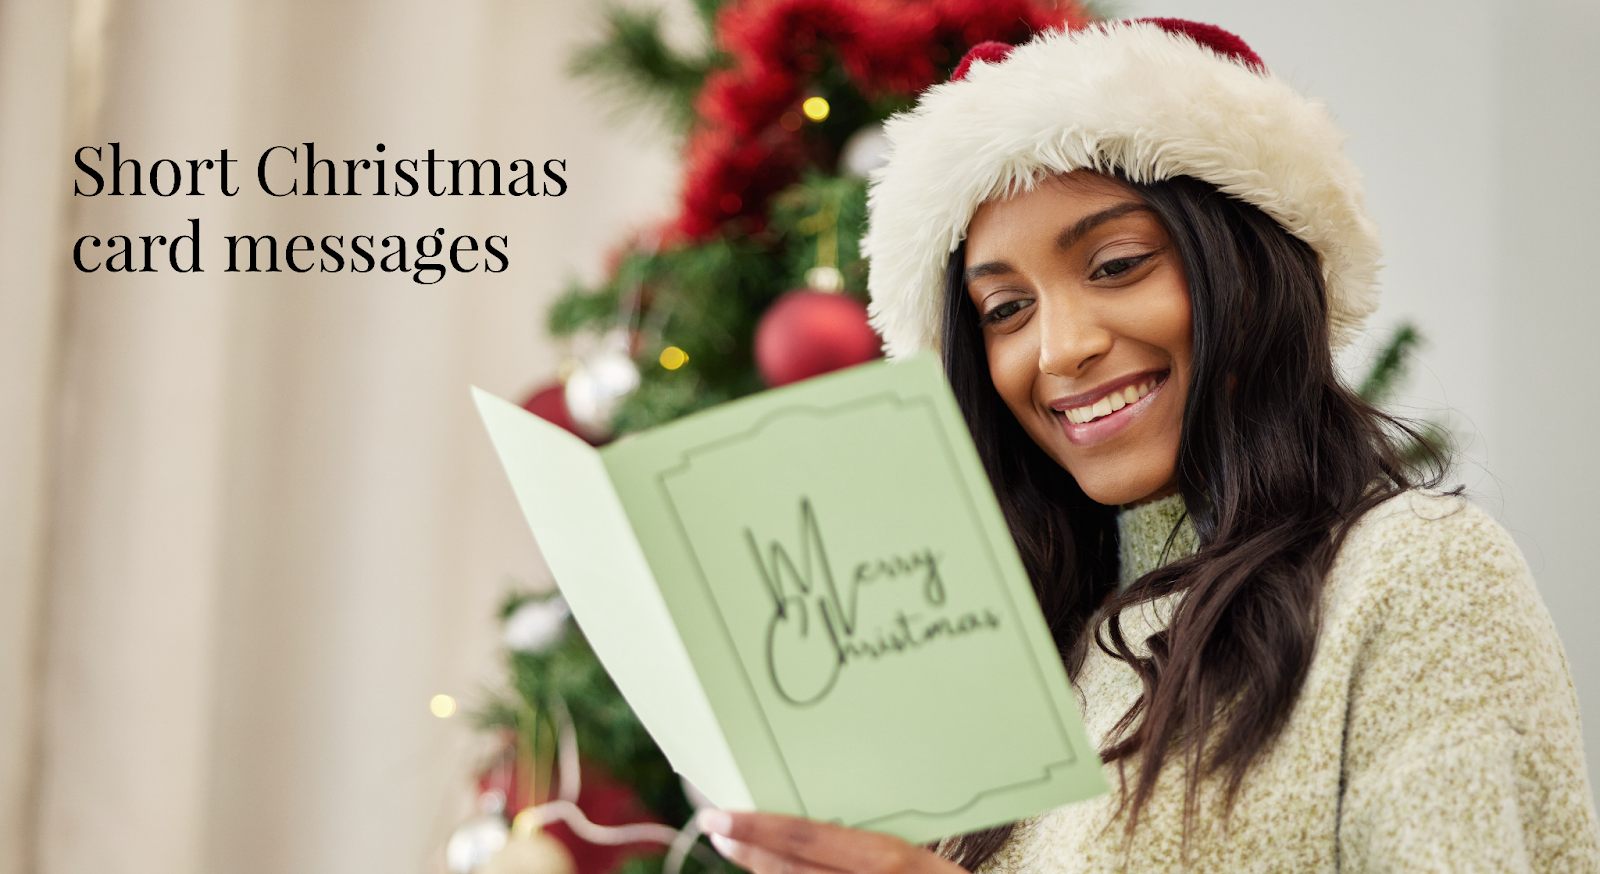 A woman reading a Christmas card with the text short Christmas card messages